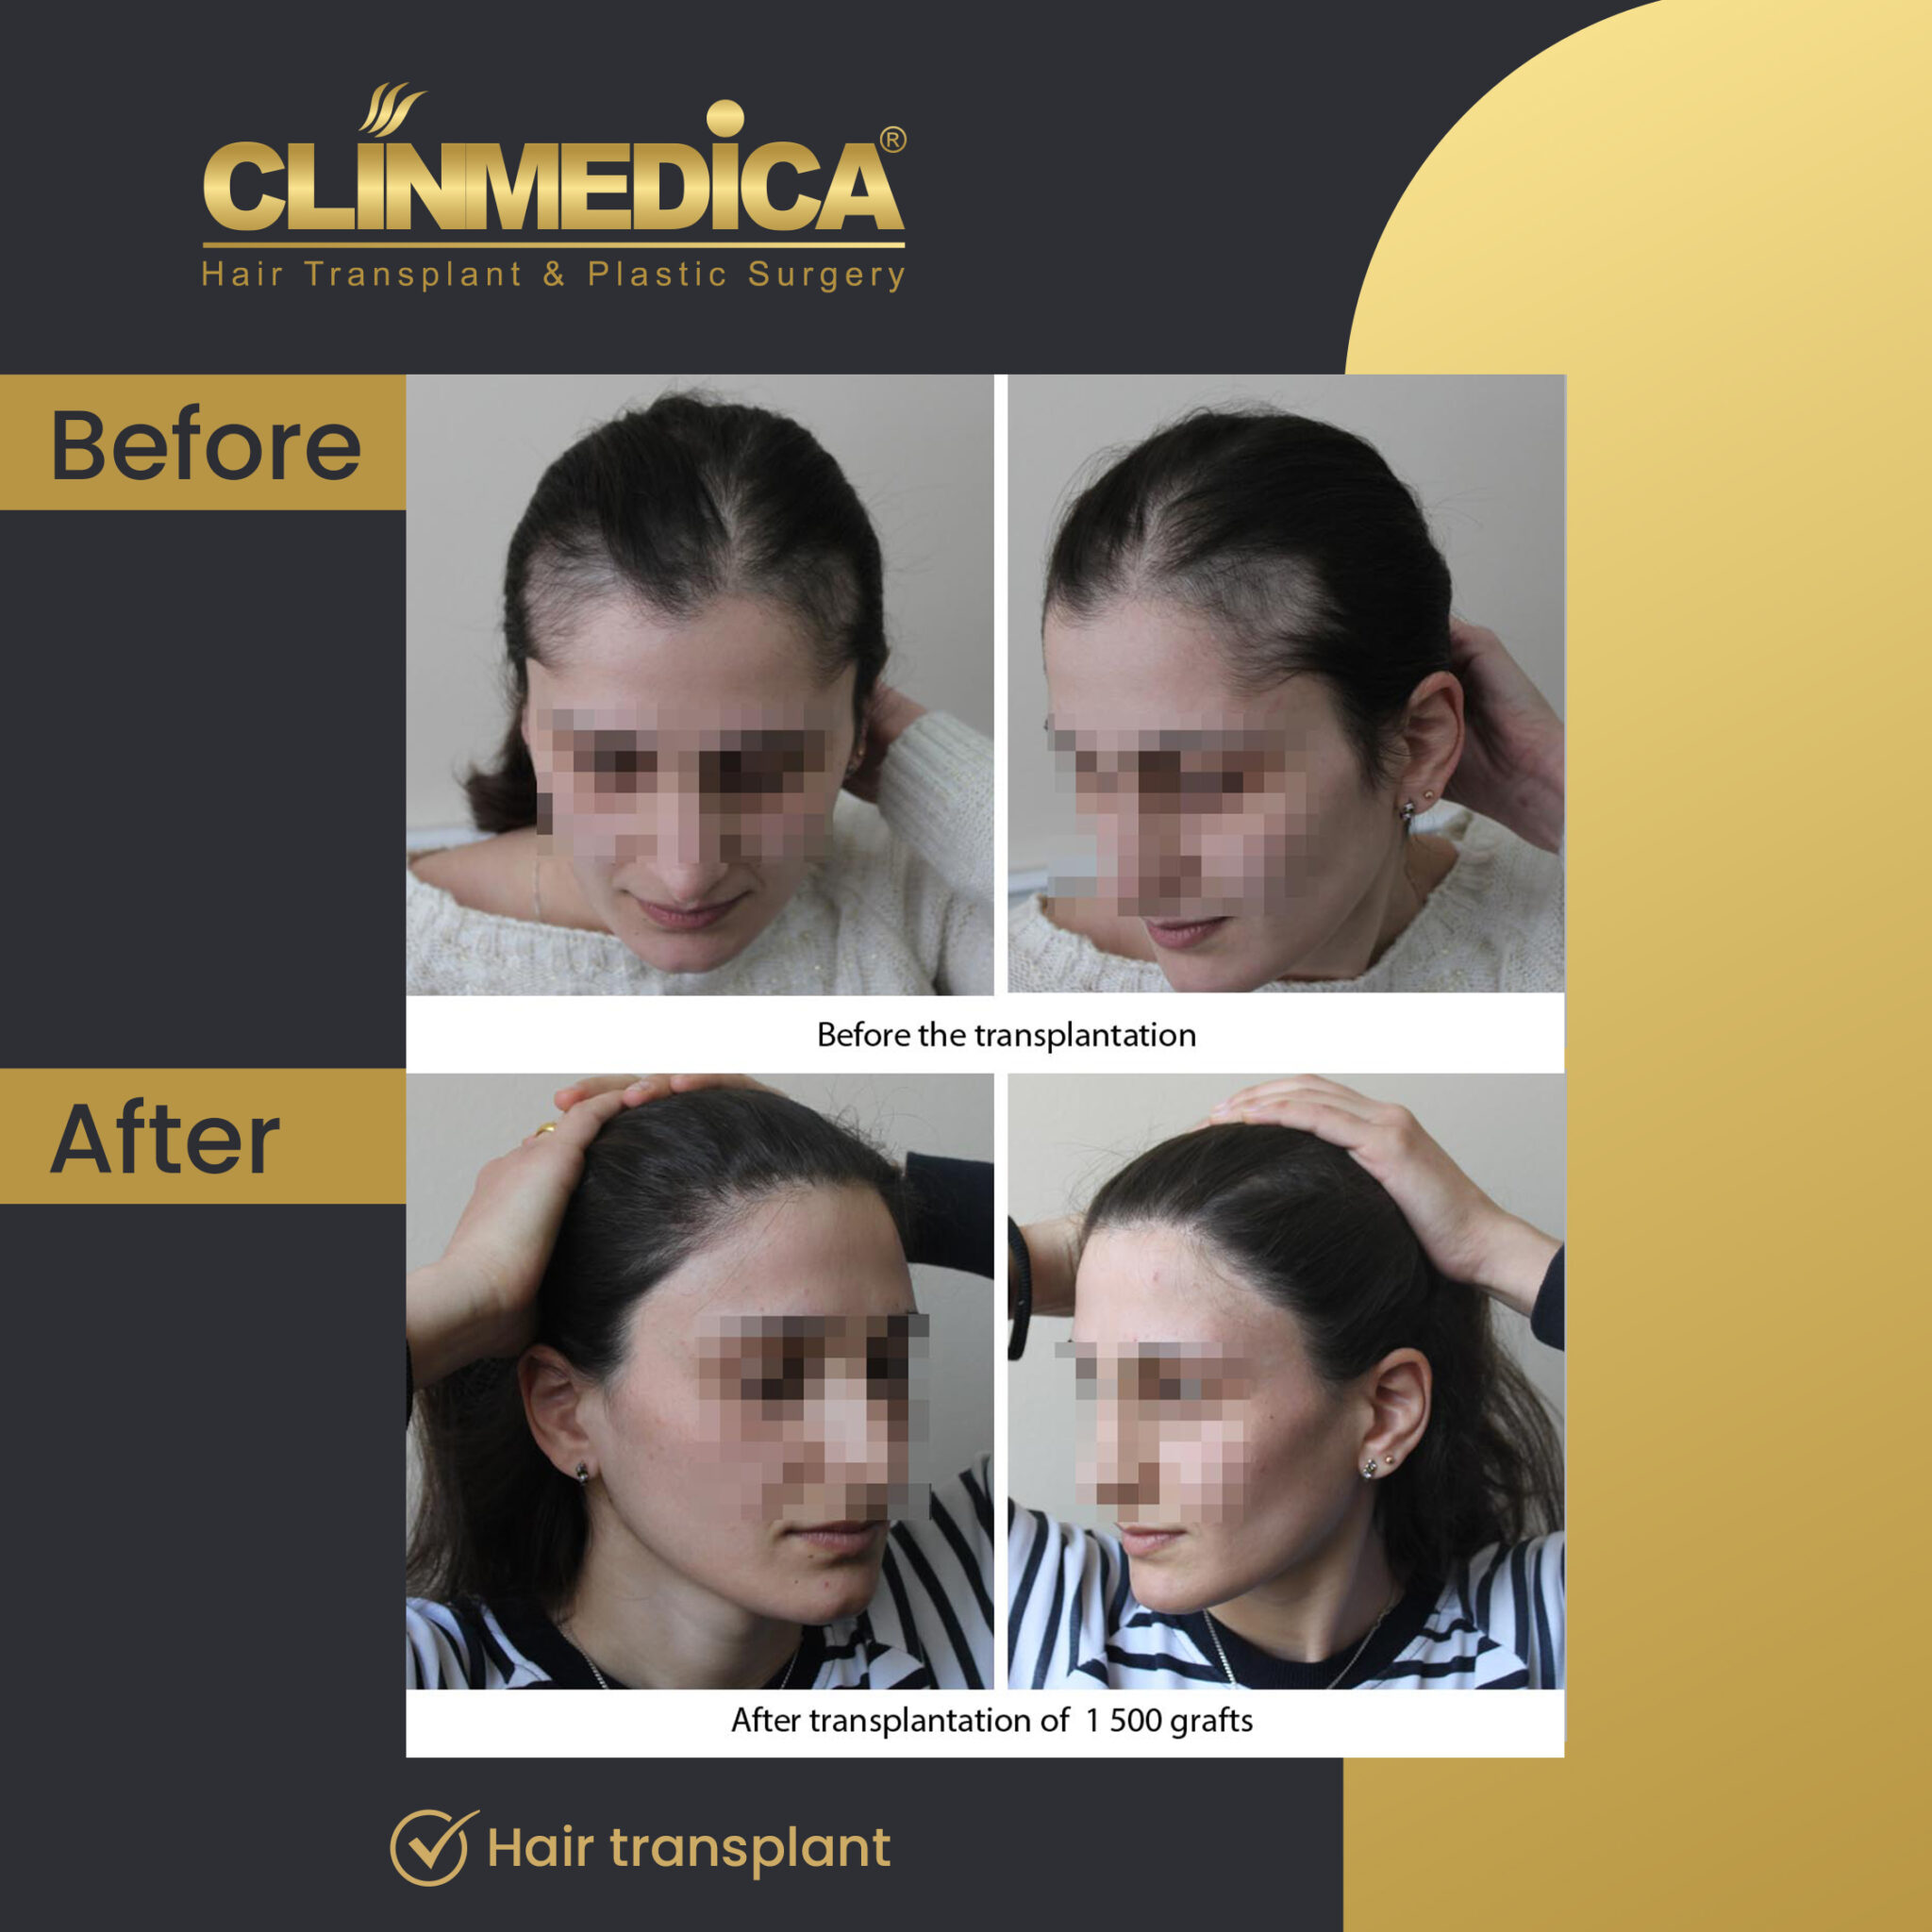 Hair-Transplant-for-women-Before-&-After-clinmedica-03